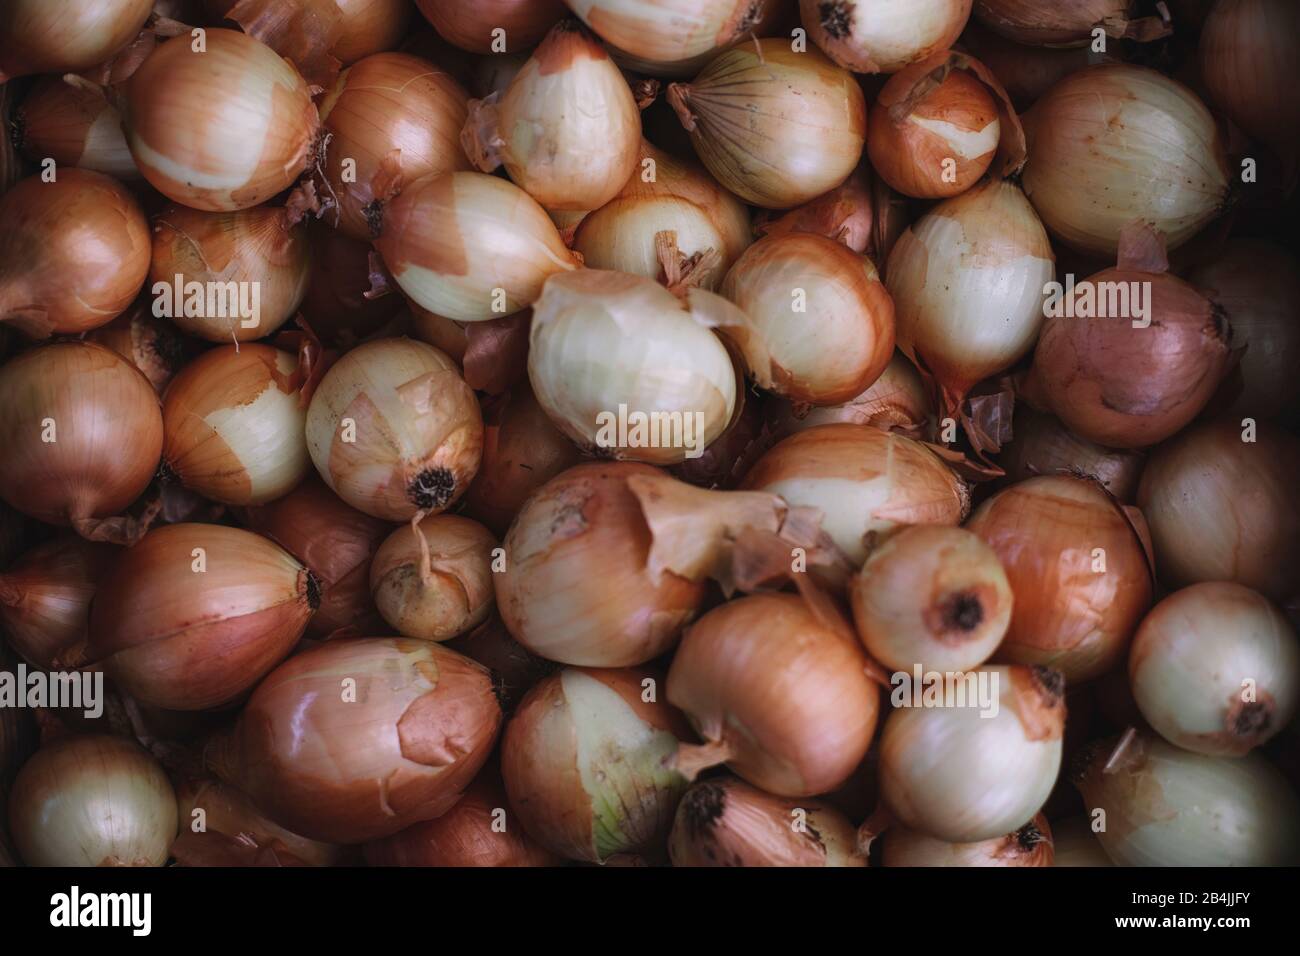 Lots of onions for sale, close-up Stock Photo